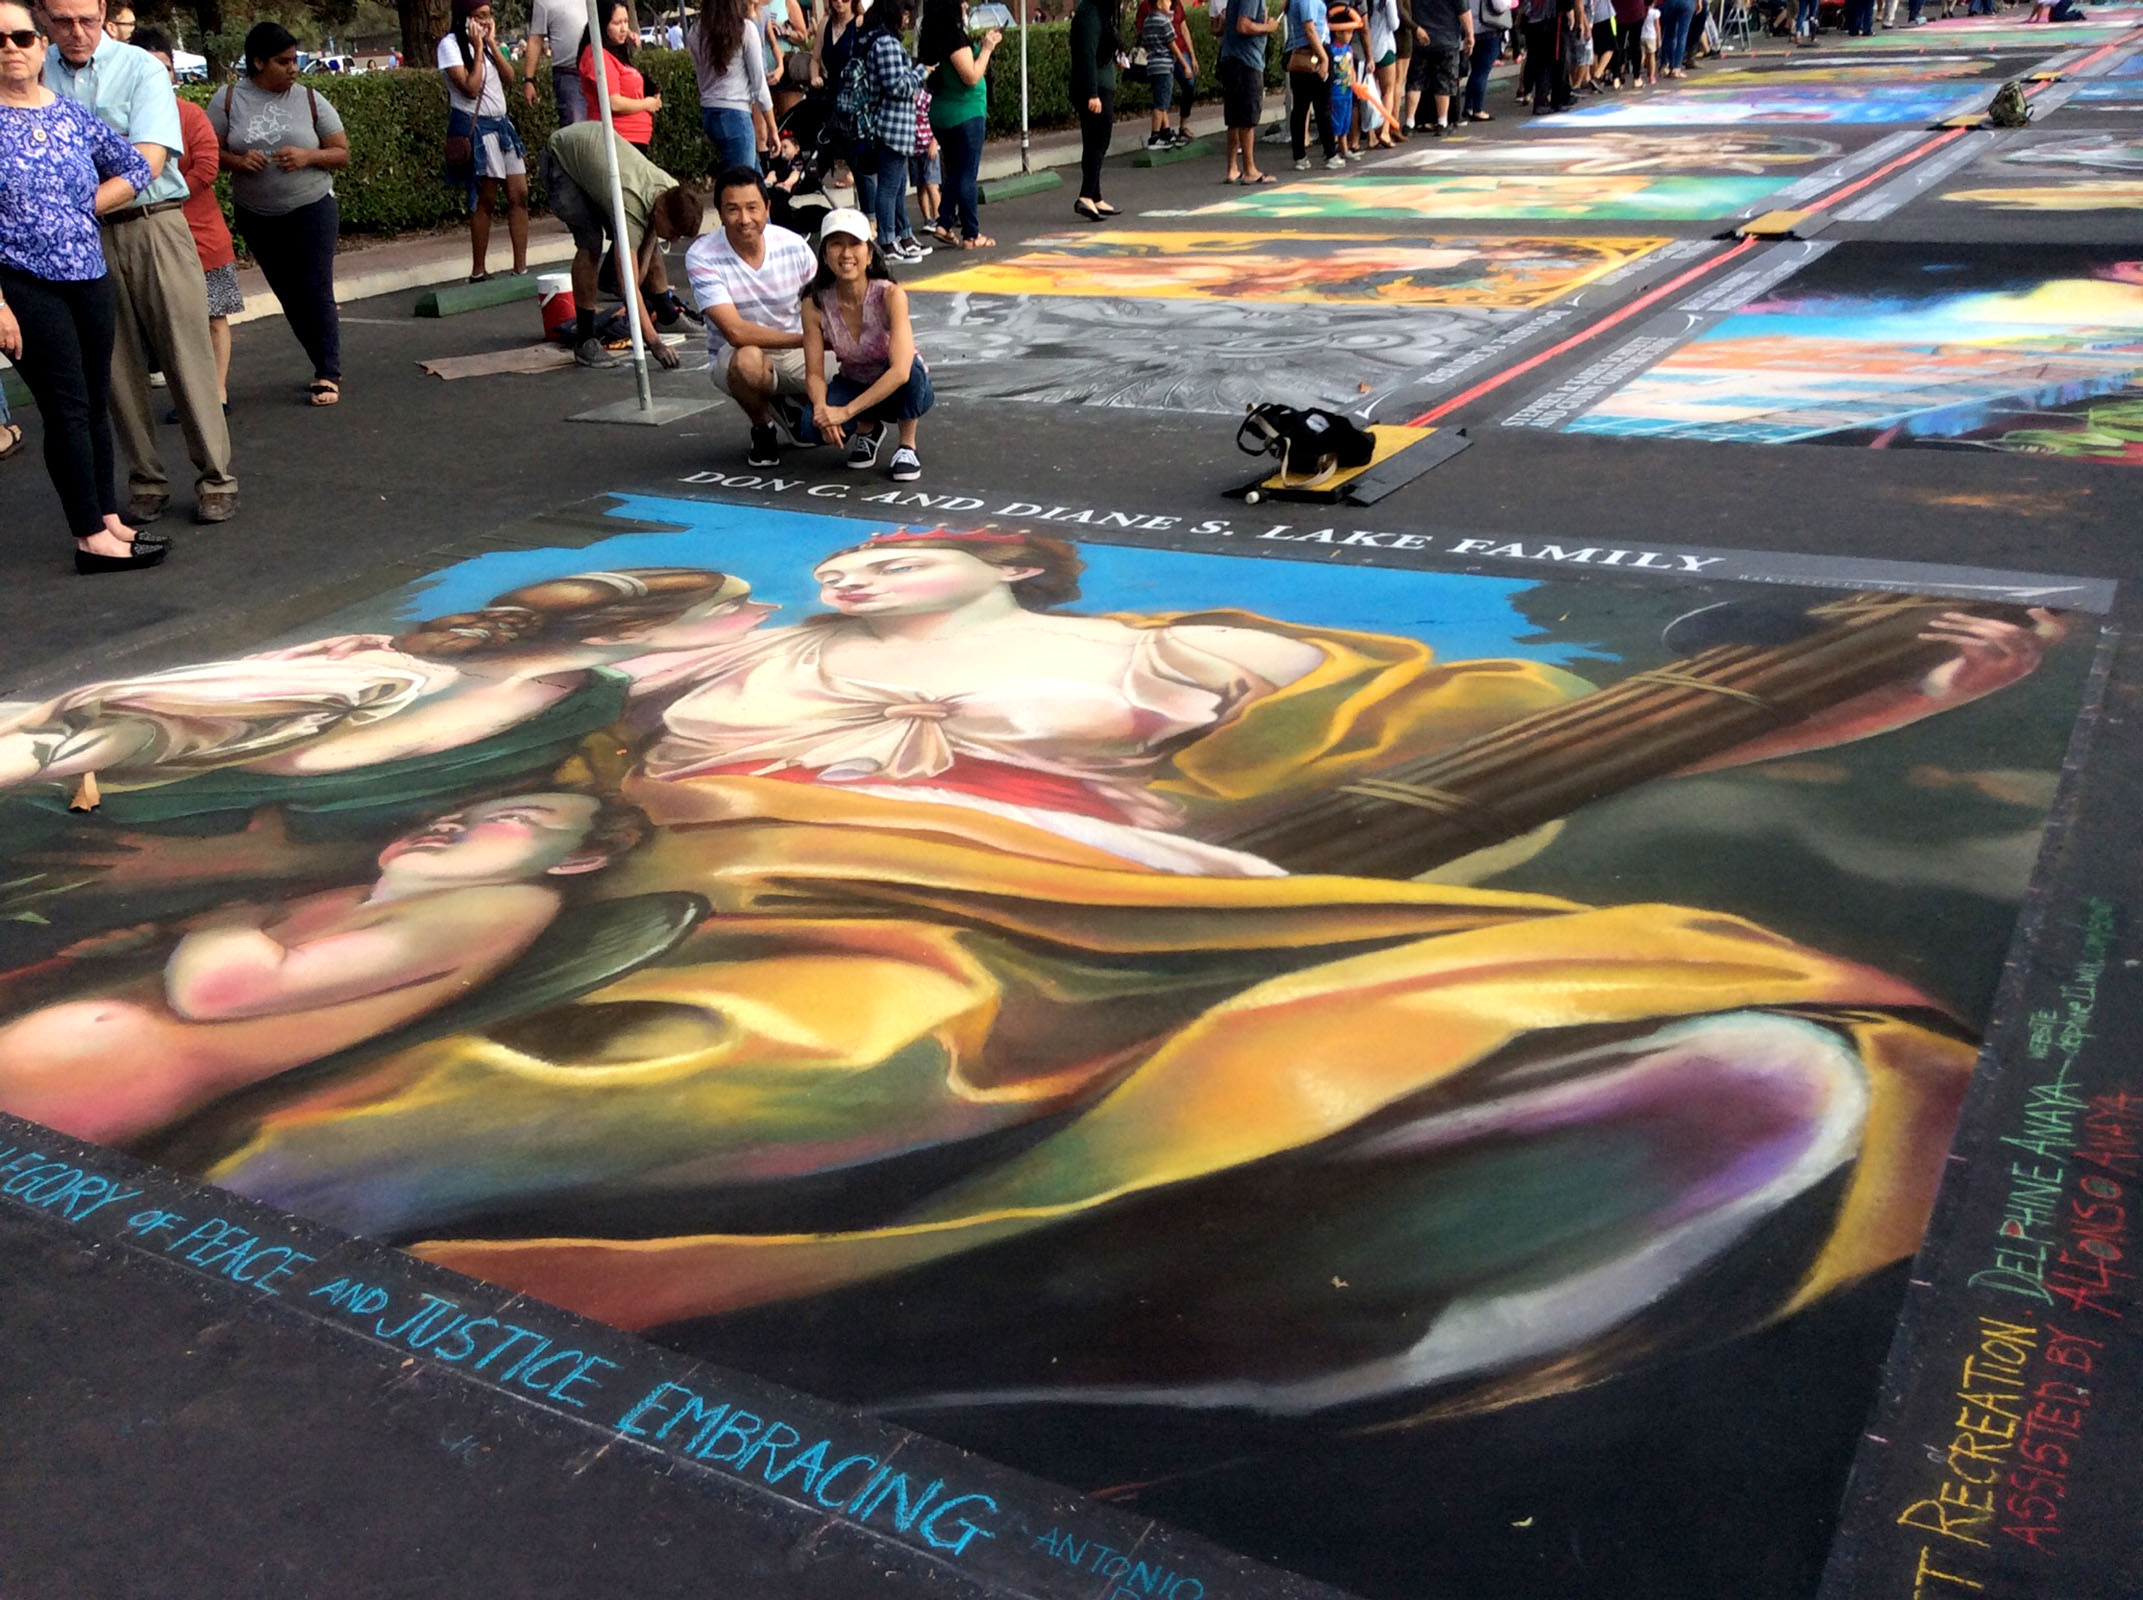 Renaissance-style chalk art on the street during a fair in downtown Grants Pass. People are crowded around the extravagant artwork.